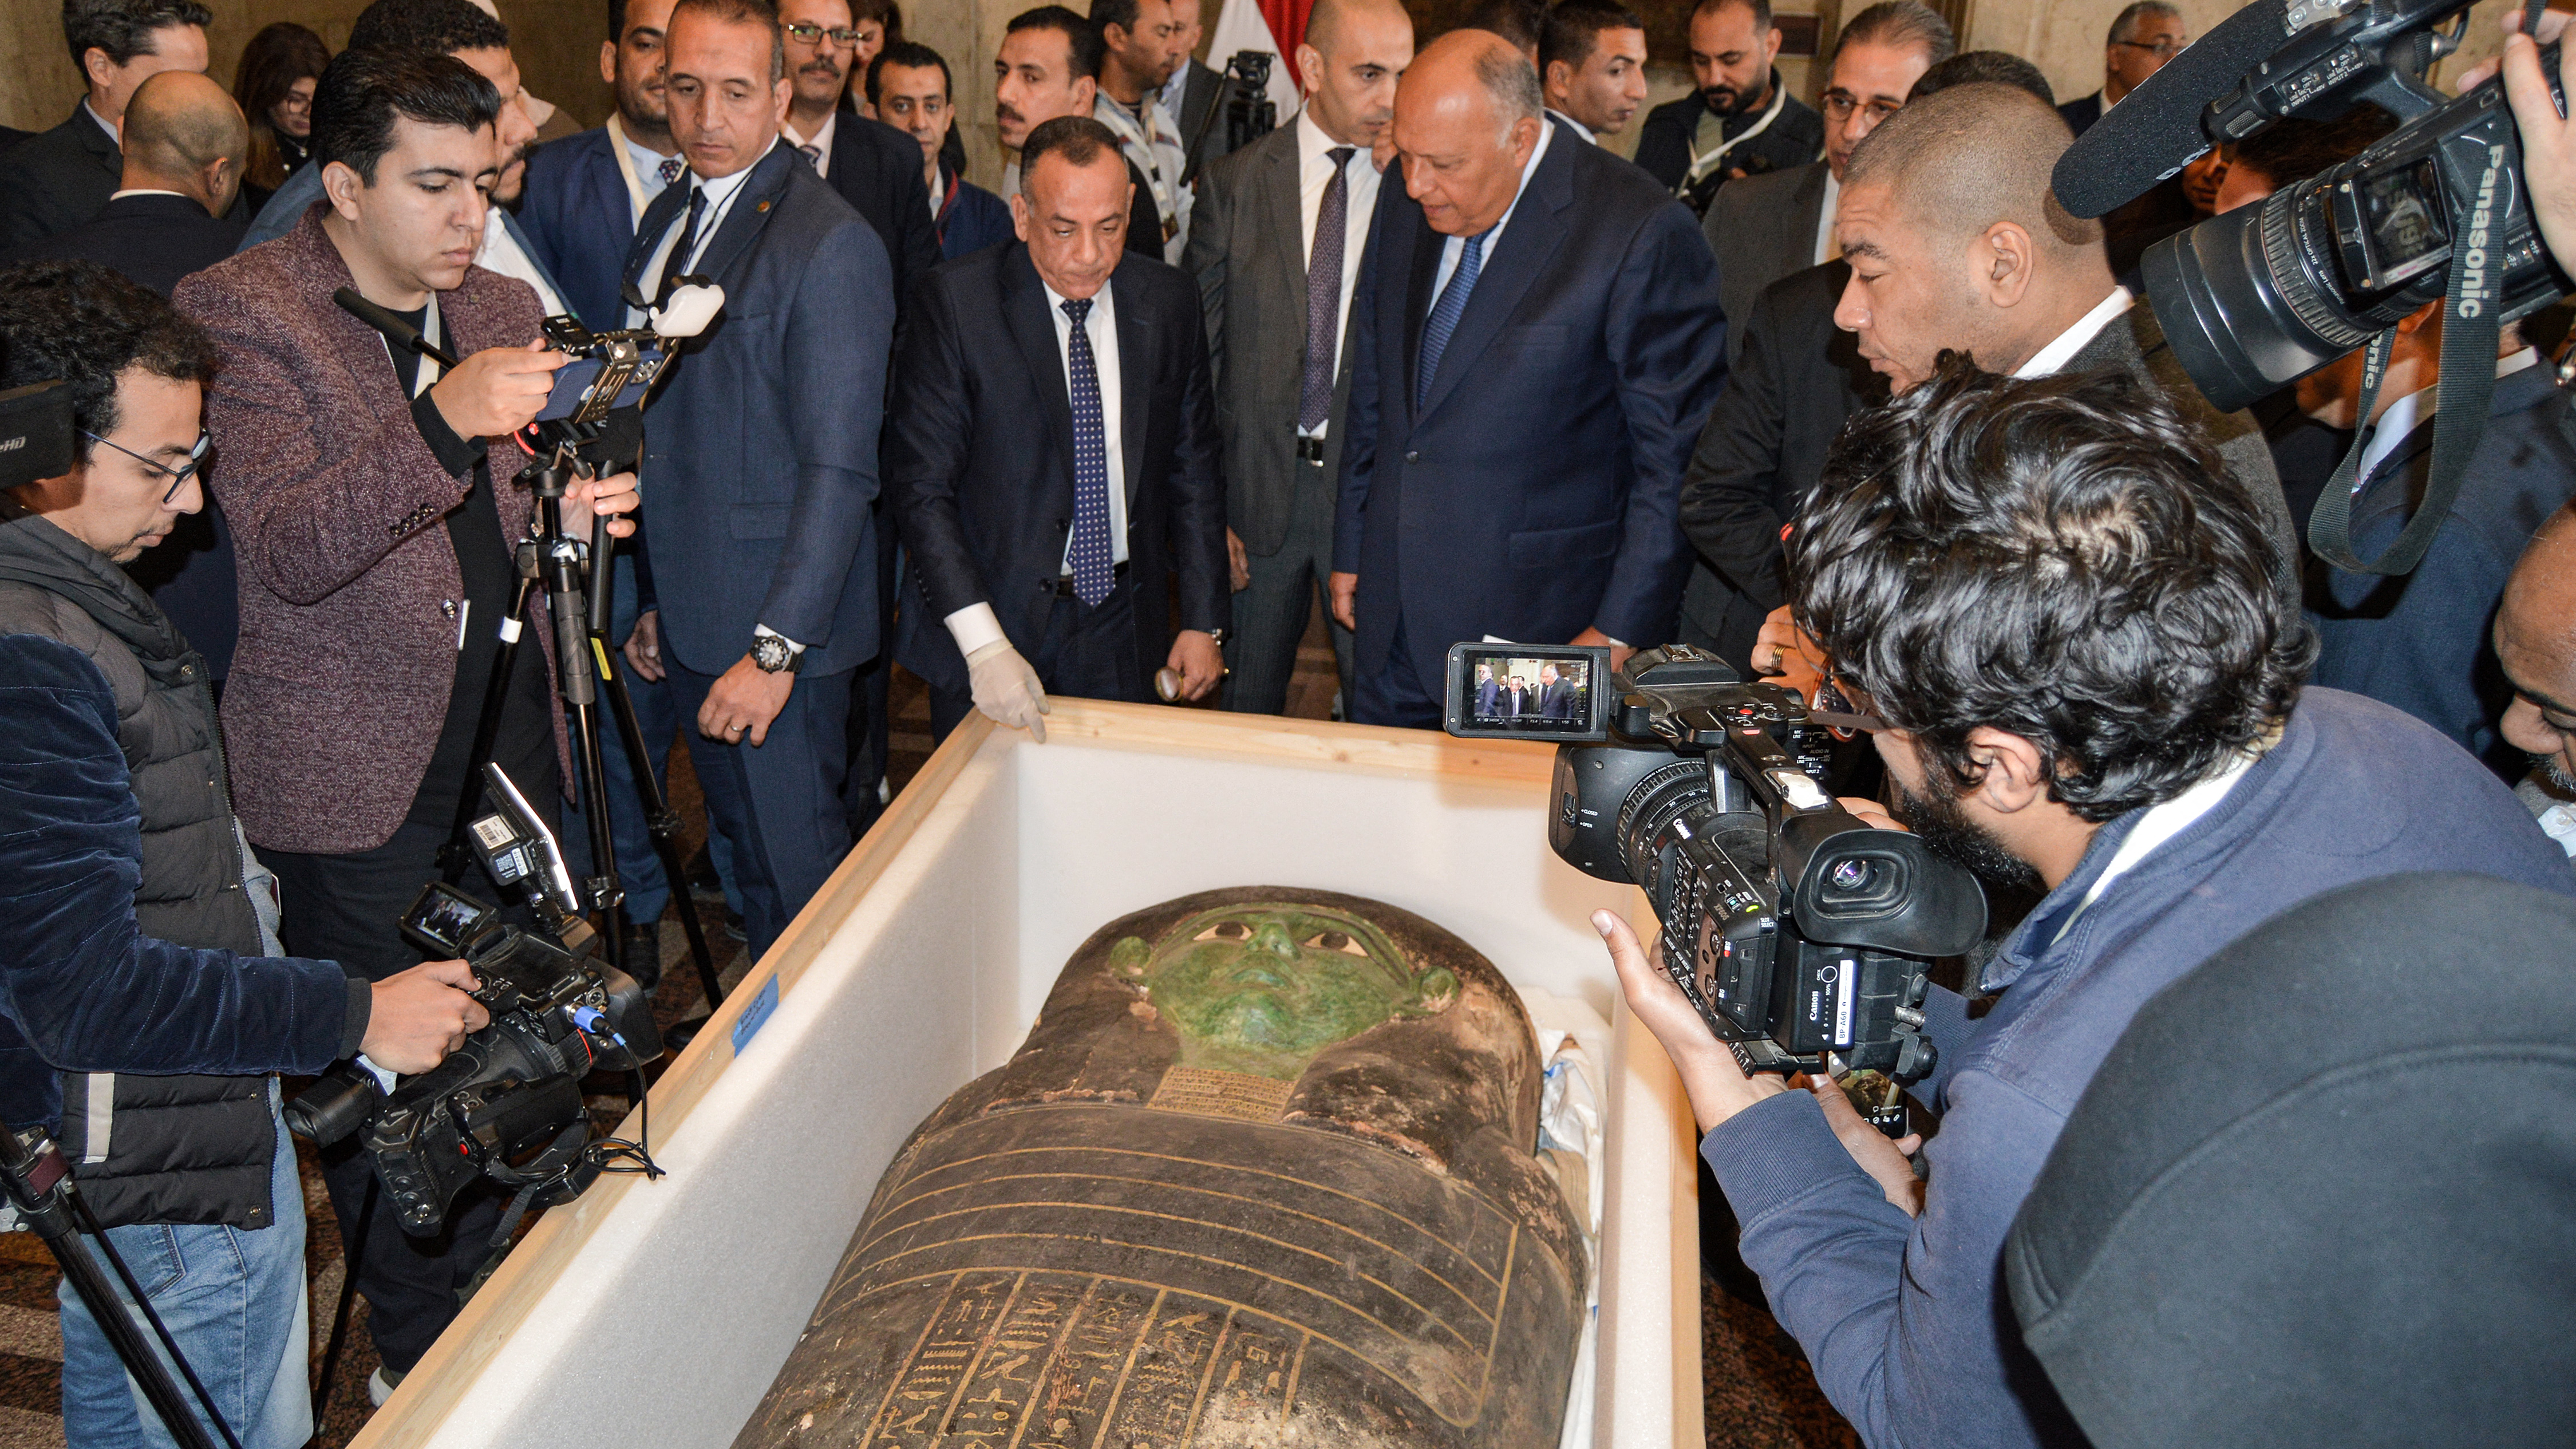 Egypt's Foreign Minister Sameh Shoukry and the head of the Supreme Council of Antiquities Mostafa Waziri inspect an ancient Egyptian wooden sarcophagus at the foreign ministry headquarters in the capital Cairo. /AFP